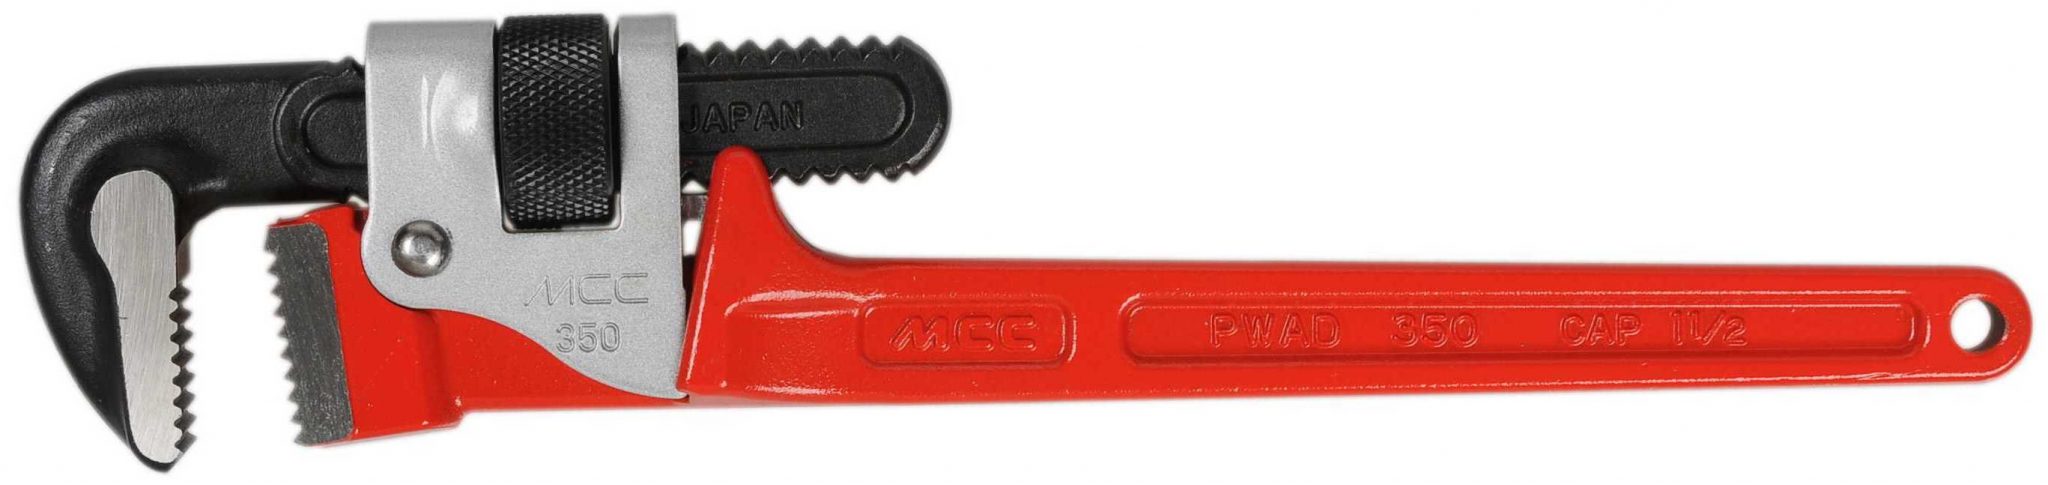 Pipe wrenches PW-AD series heavy duty